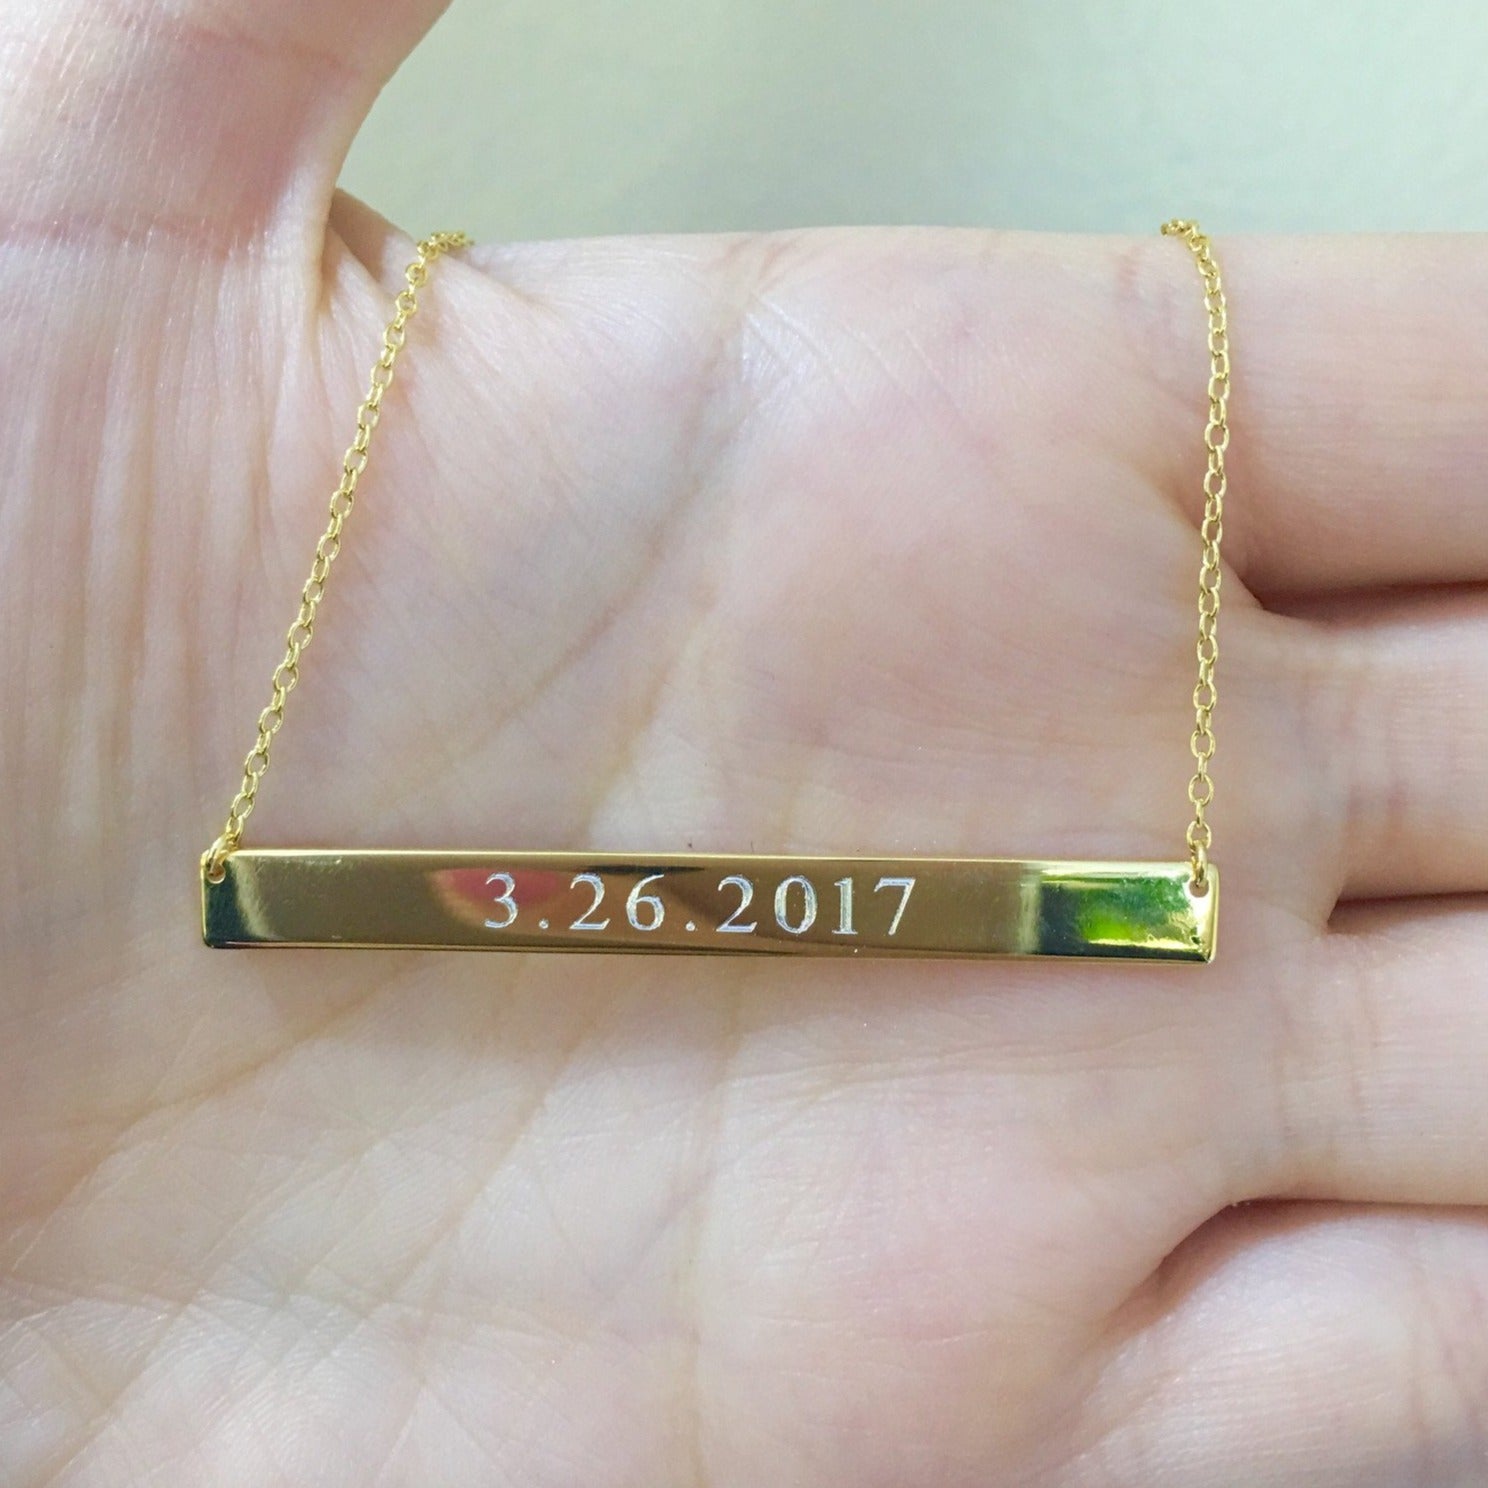 Large Bar Engraved Nameplate Necklace - Retail Therapy Jewelry